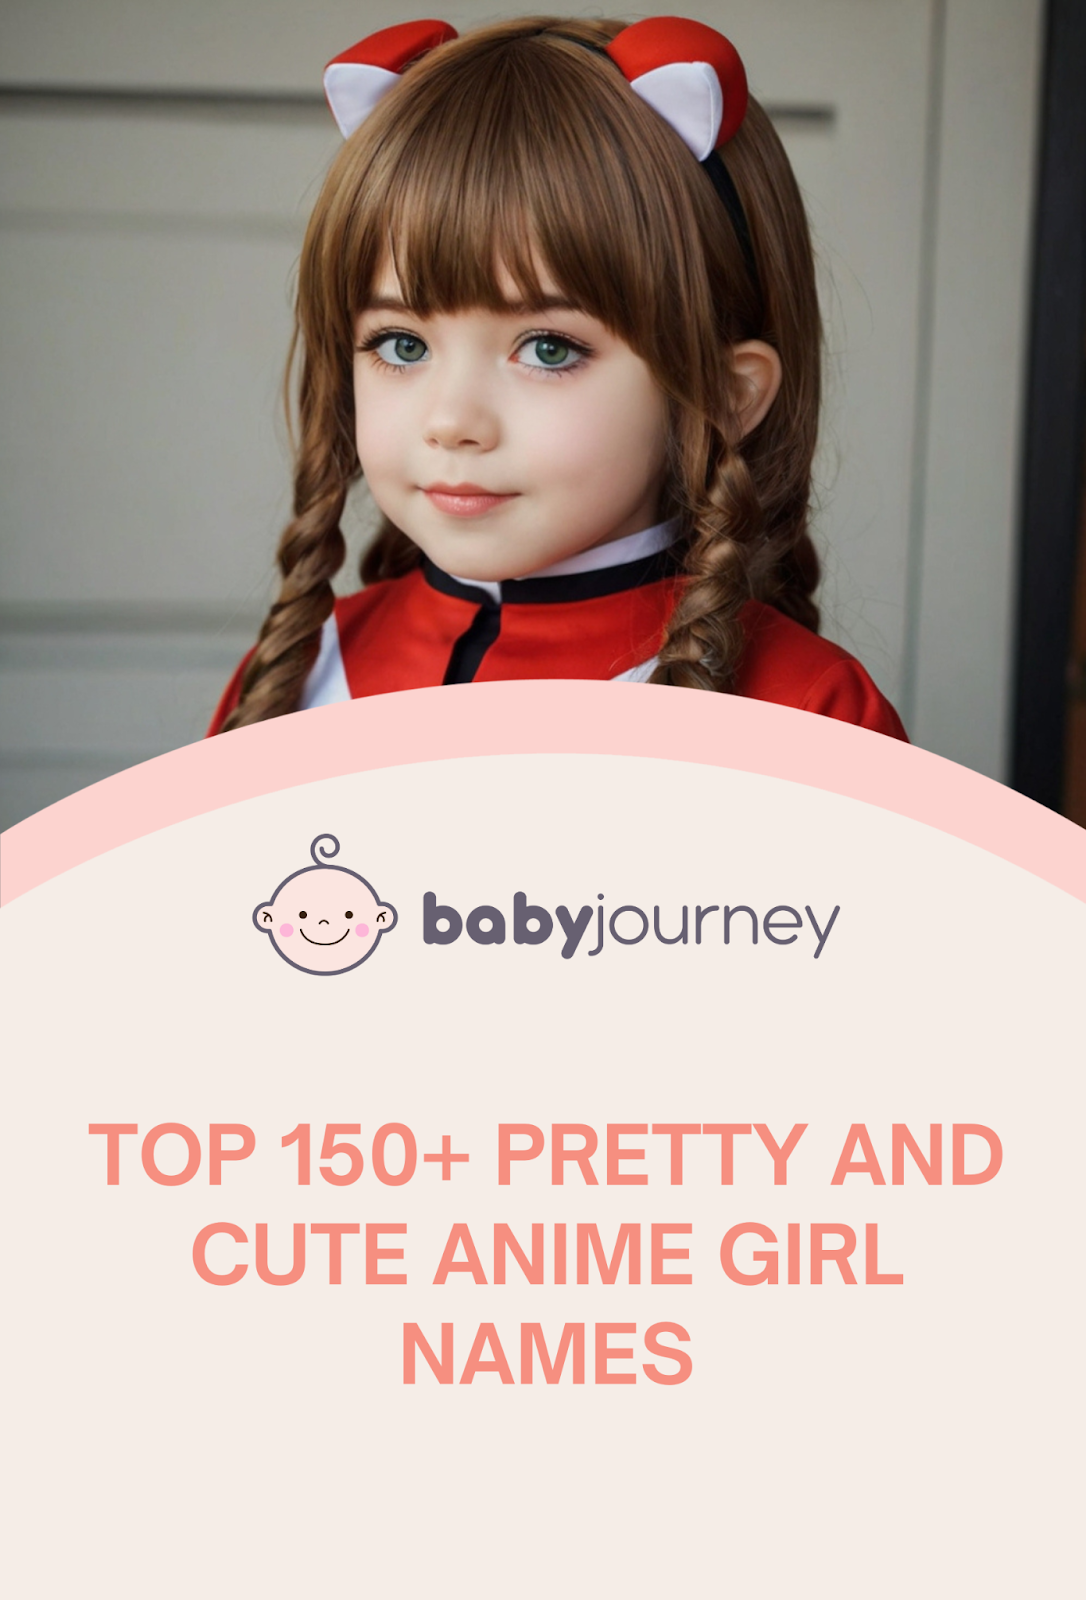 Top 150+ Pretty and Cute Anime Girl Names - Anime Girl Names - Baby Journey